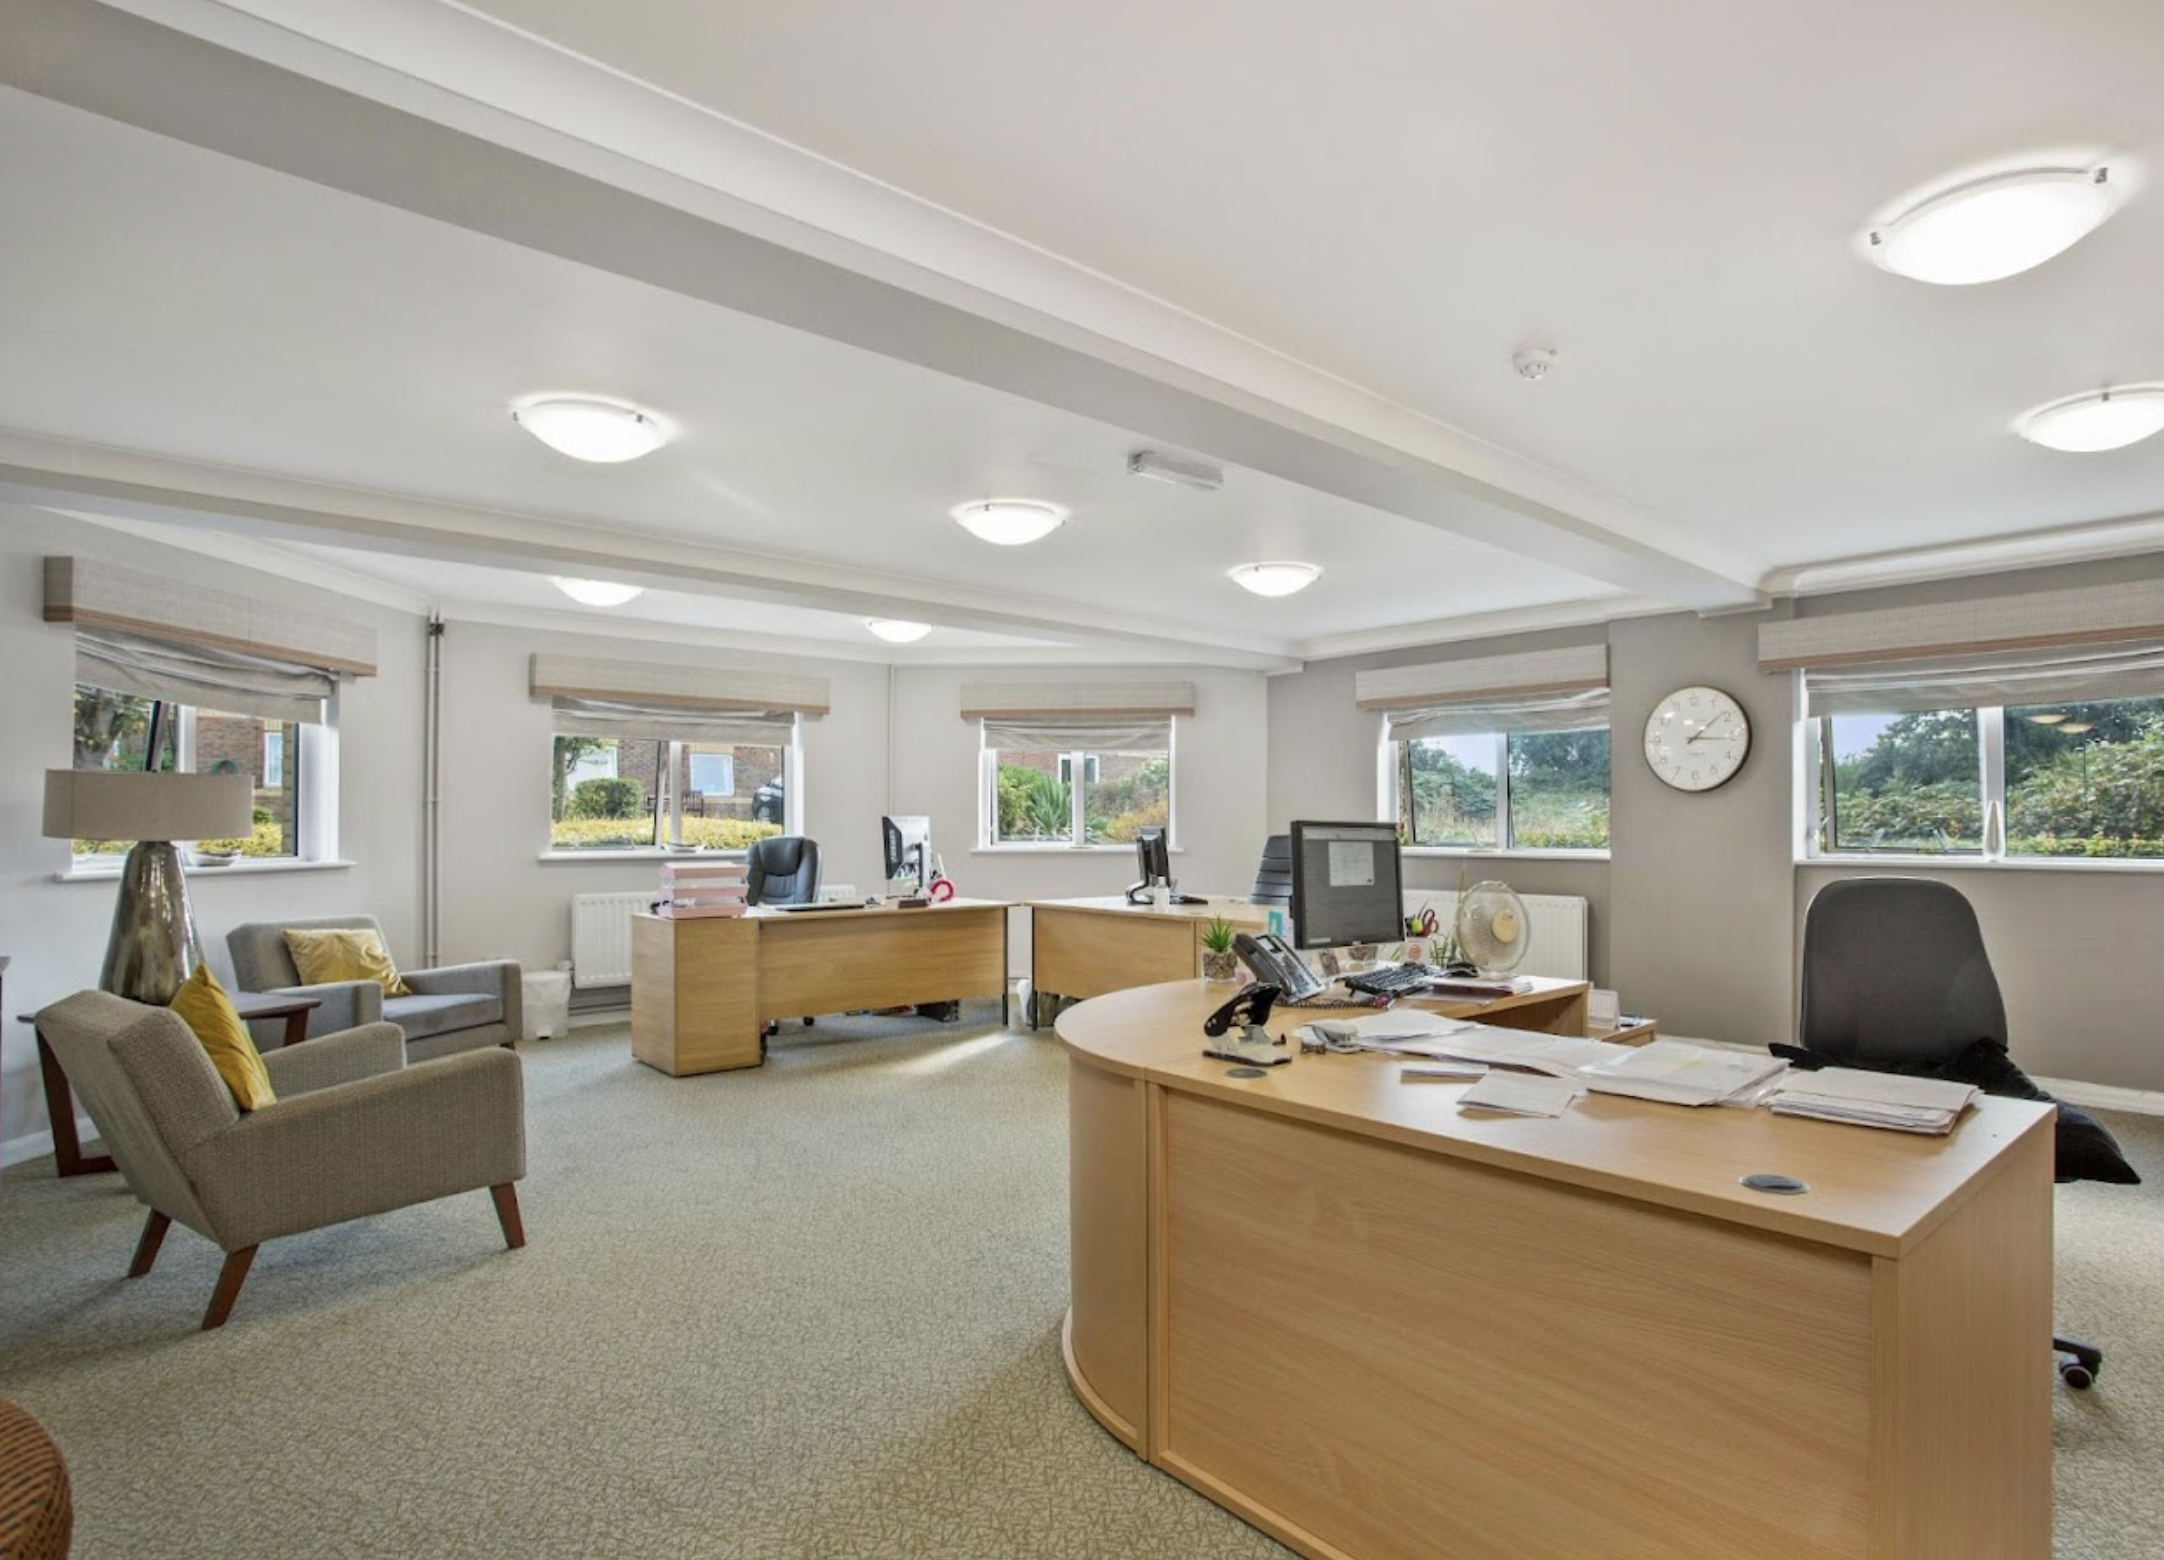 Reception of Wombell Hall care home in Northfleet, Gravesend